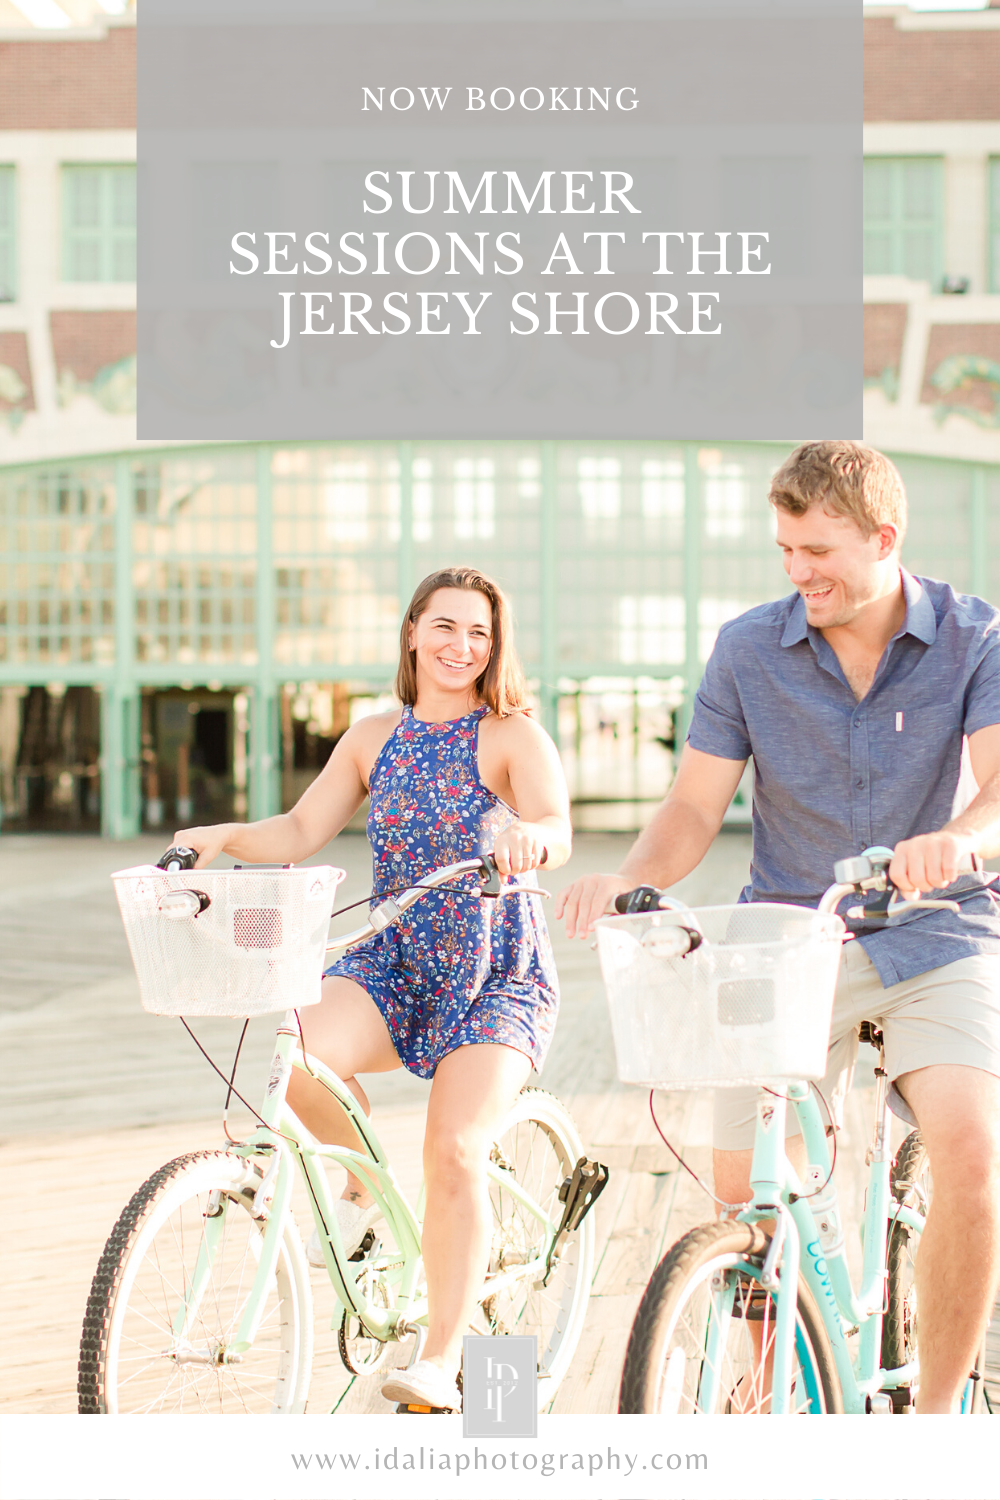 Now booking engagement sessions at the Jersey Shore